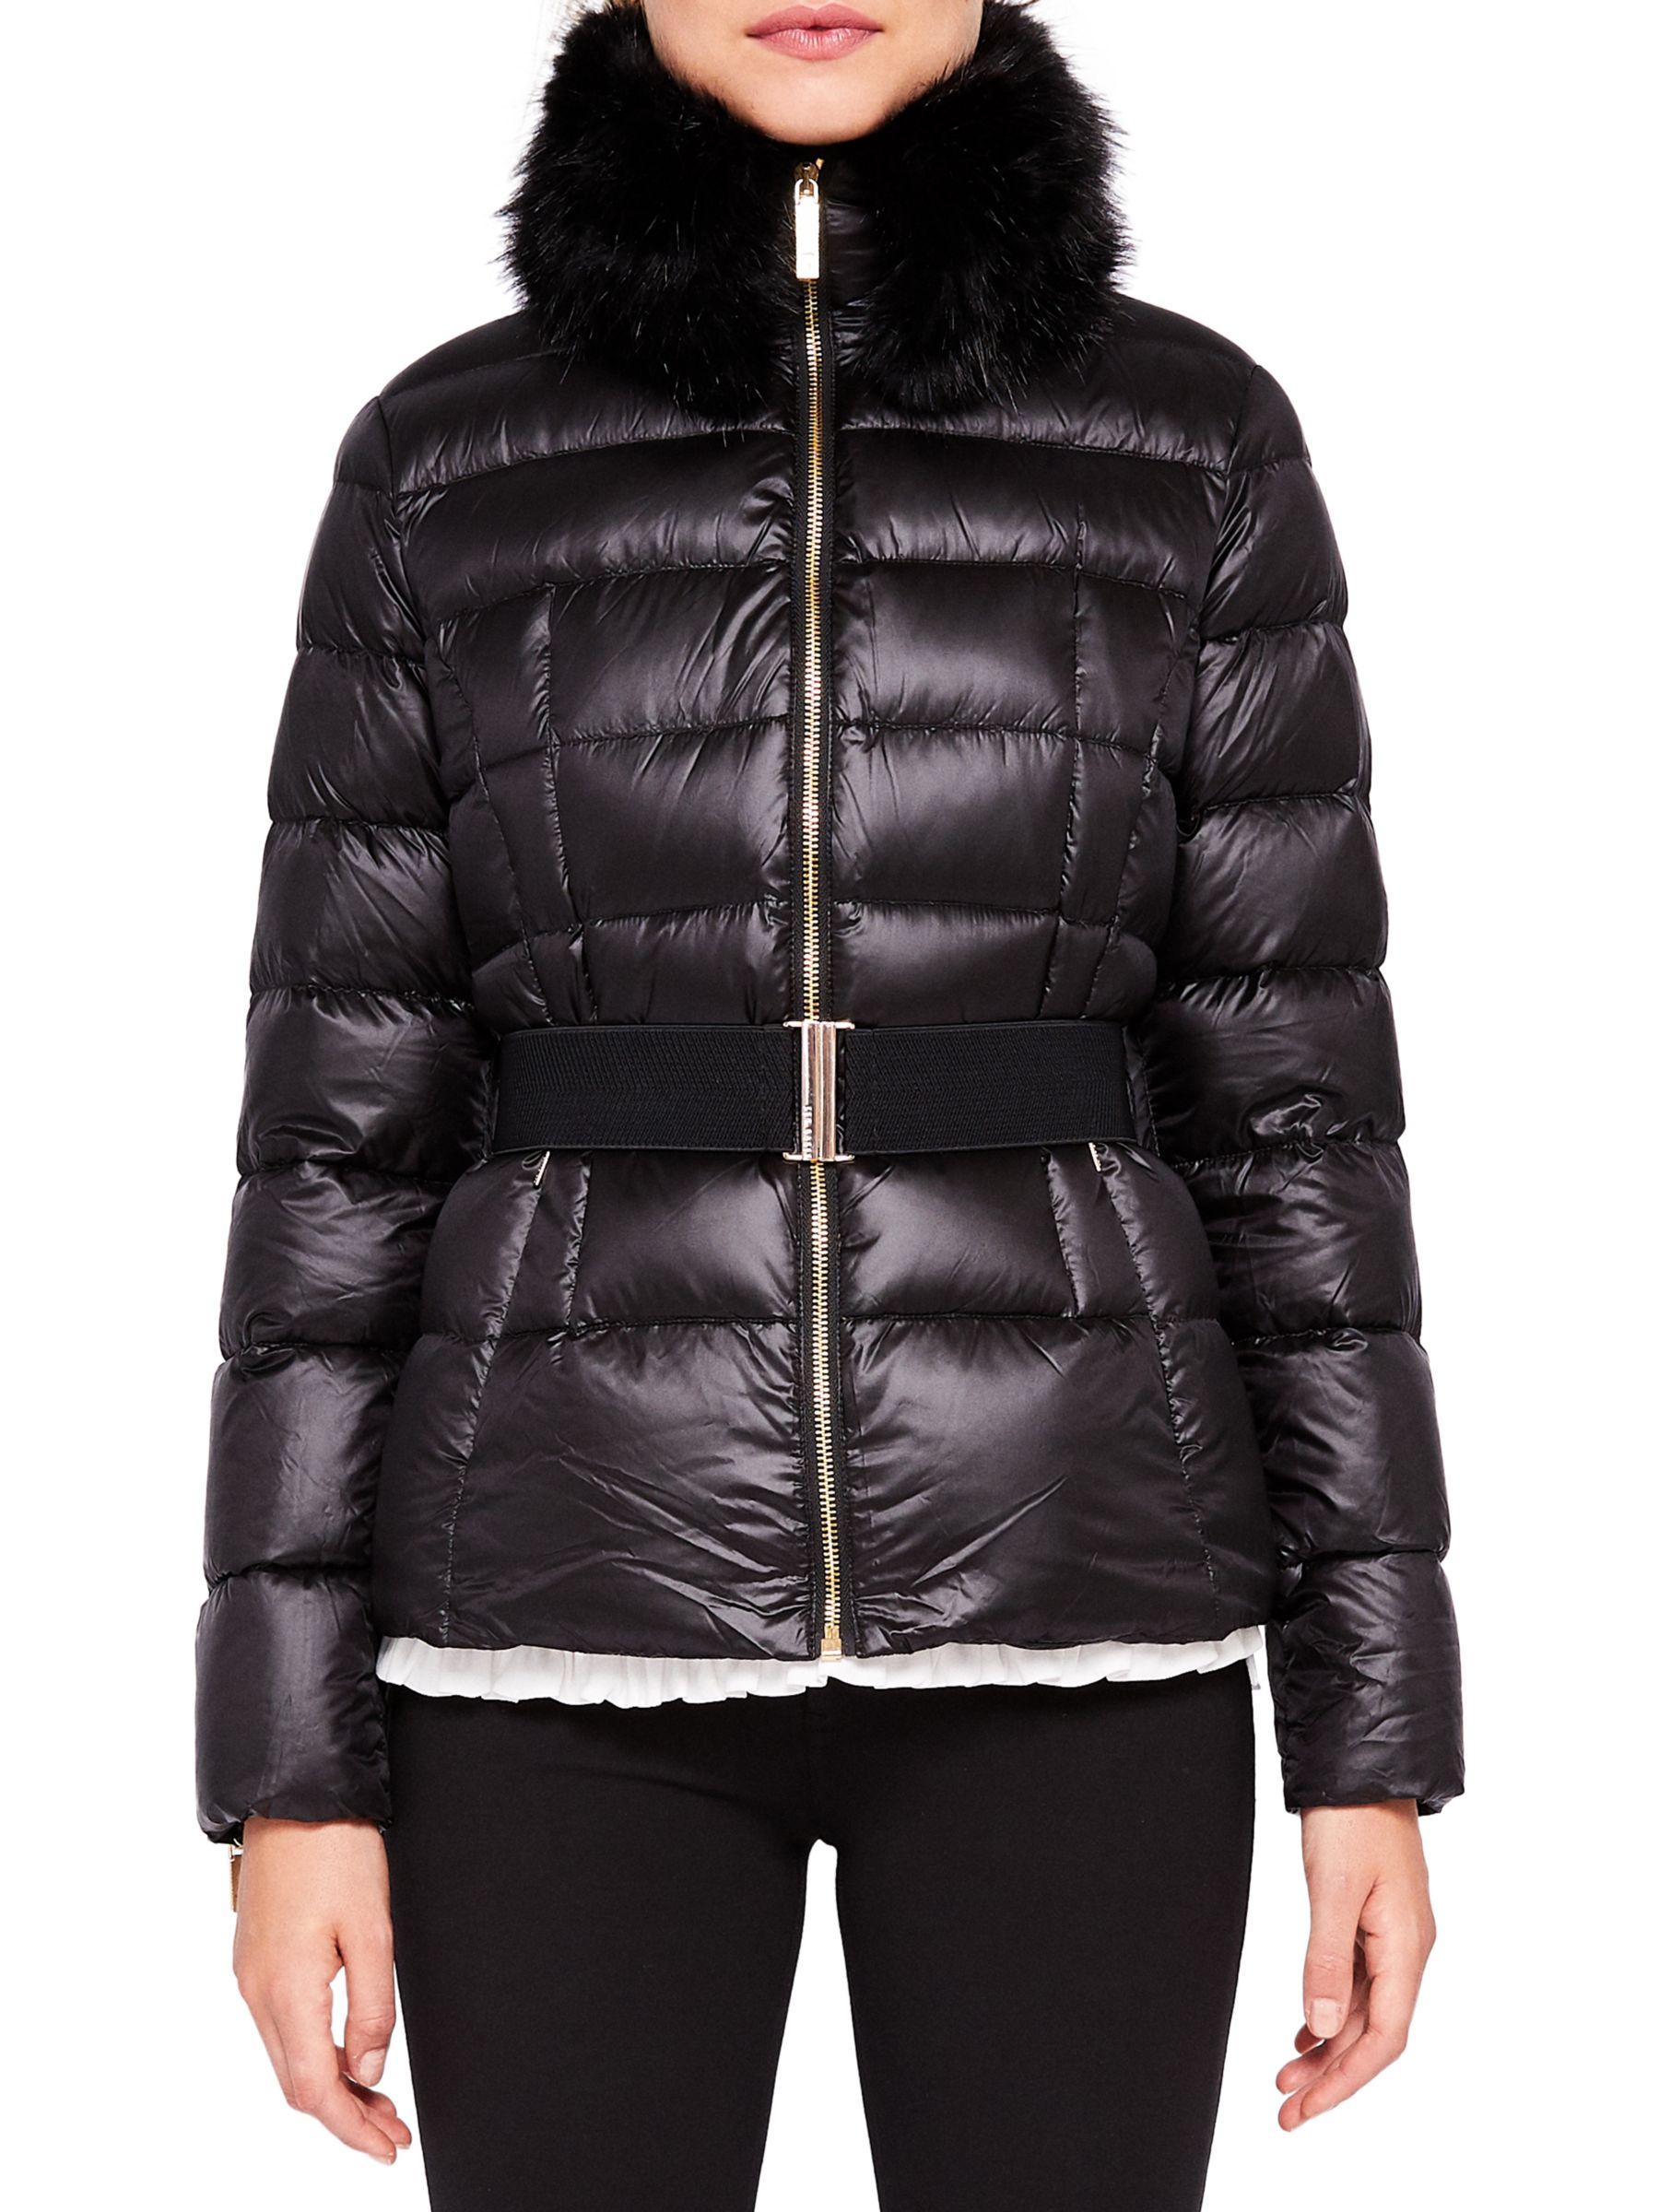 Ted Baker Junnie Quilted Down Filled Jacket at John Lewis & Partners